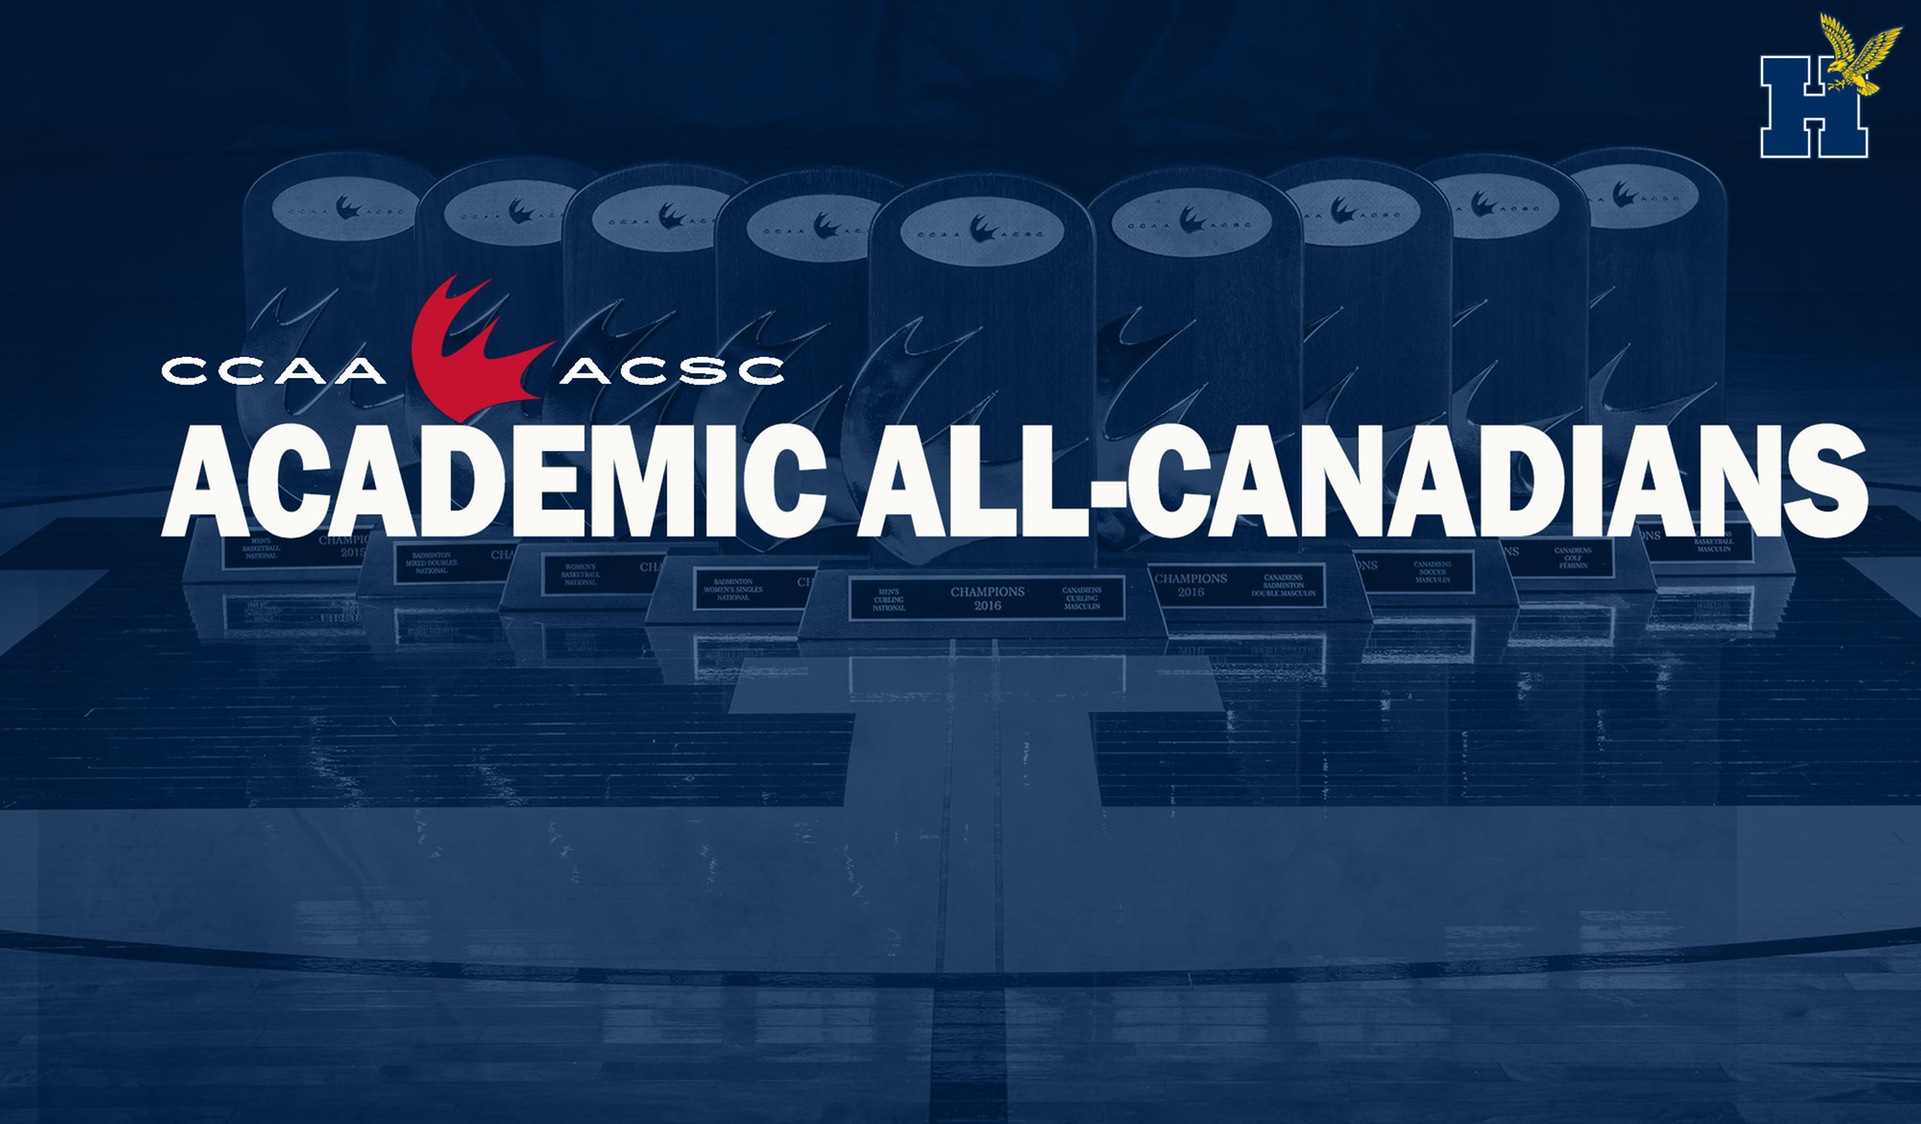 Humber leads the nation with 15 Academic All-Canadian selections for the second straight season